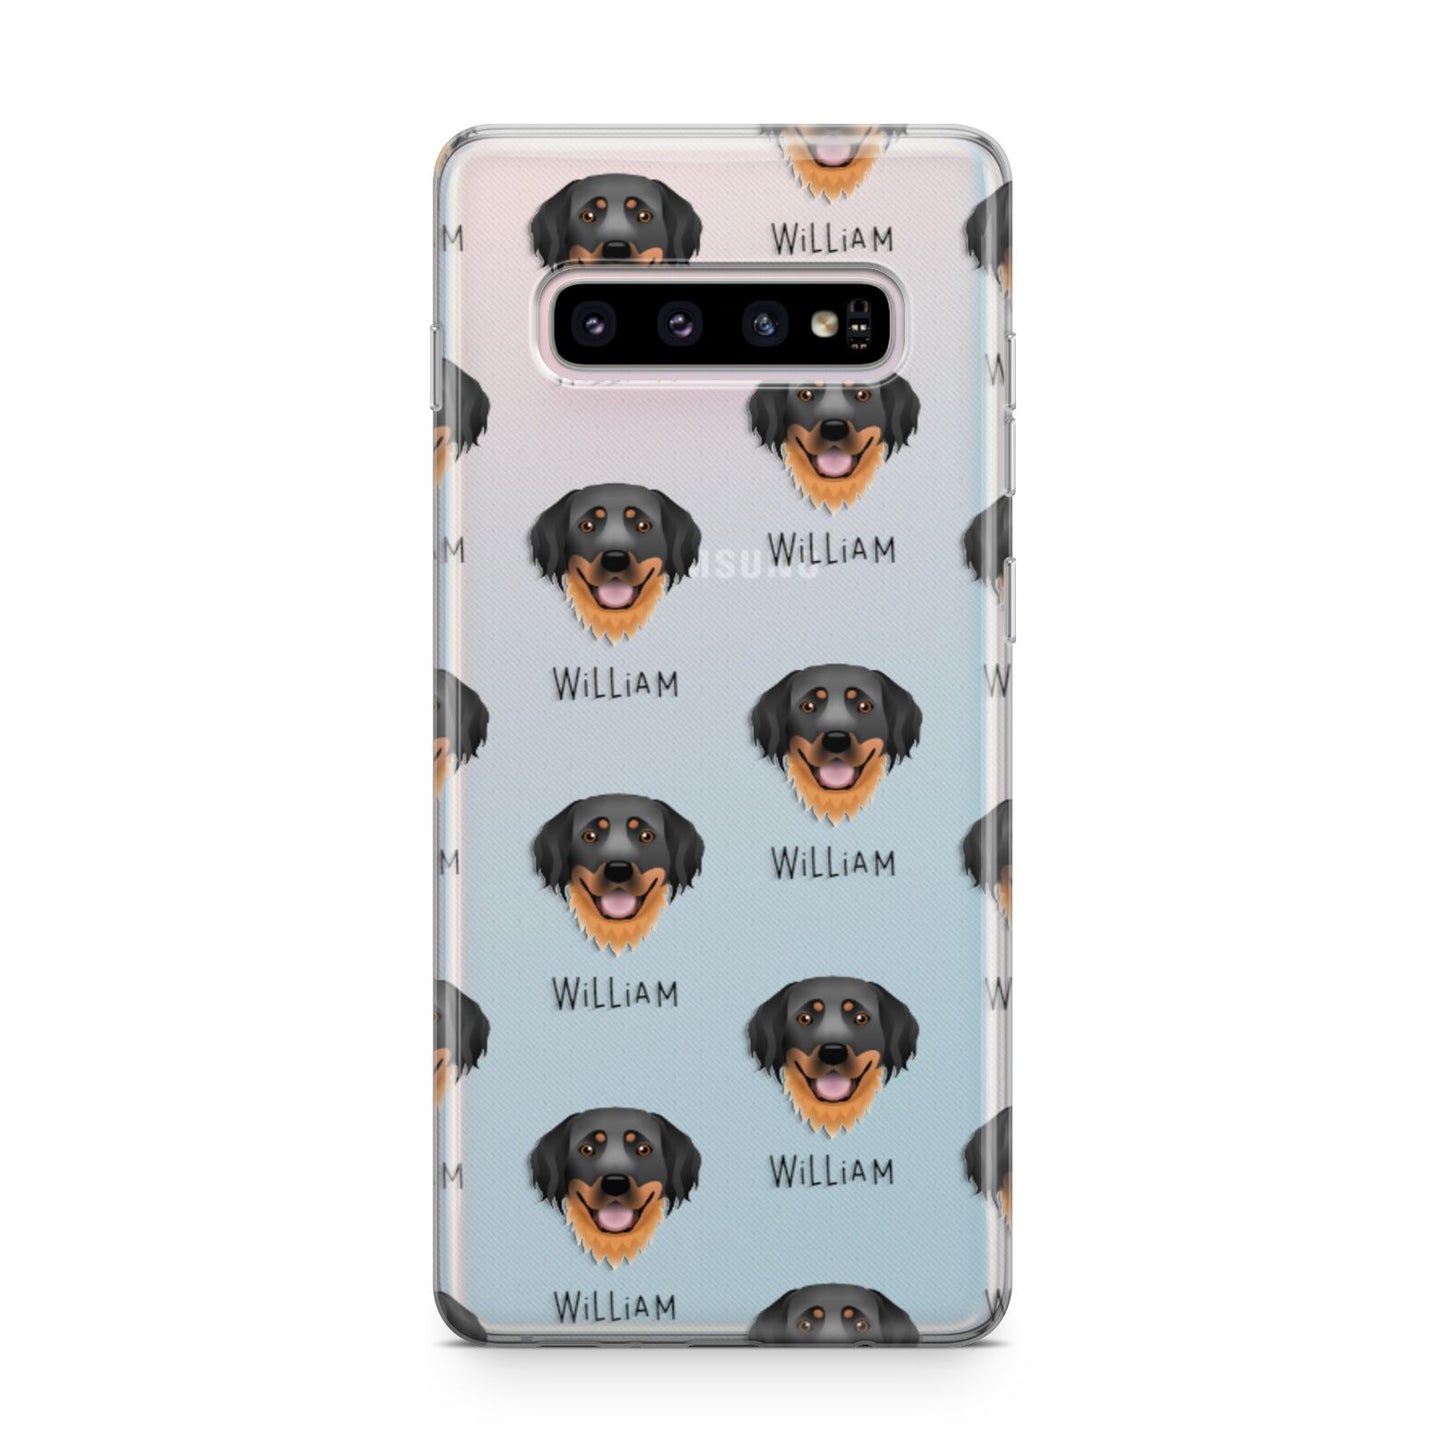 Hovawart Icon with Name Samsung Galaxy S10 Plus Case